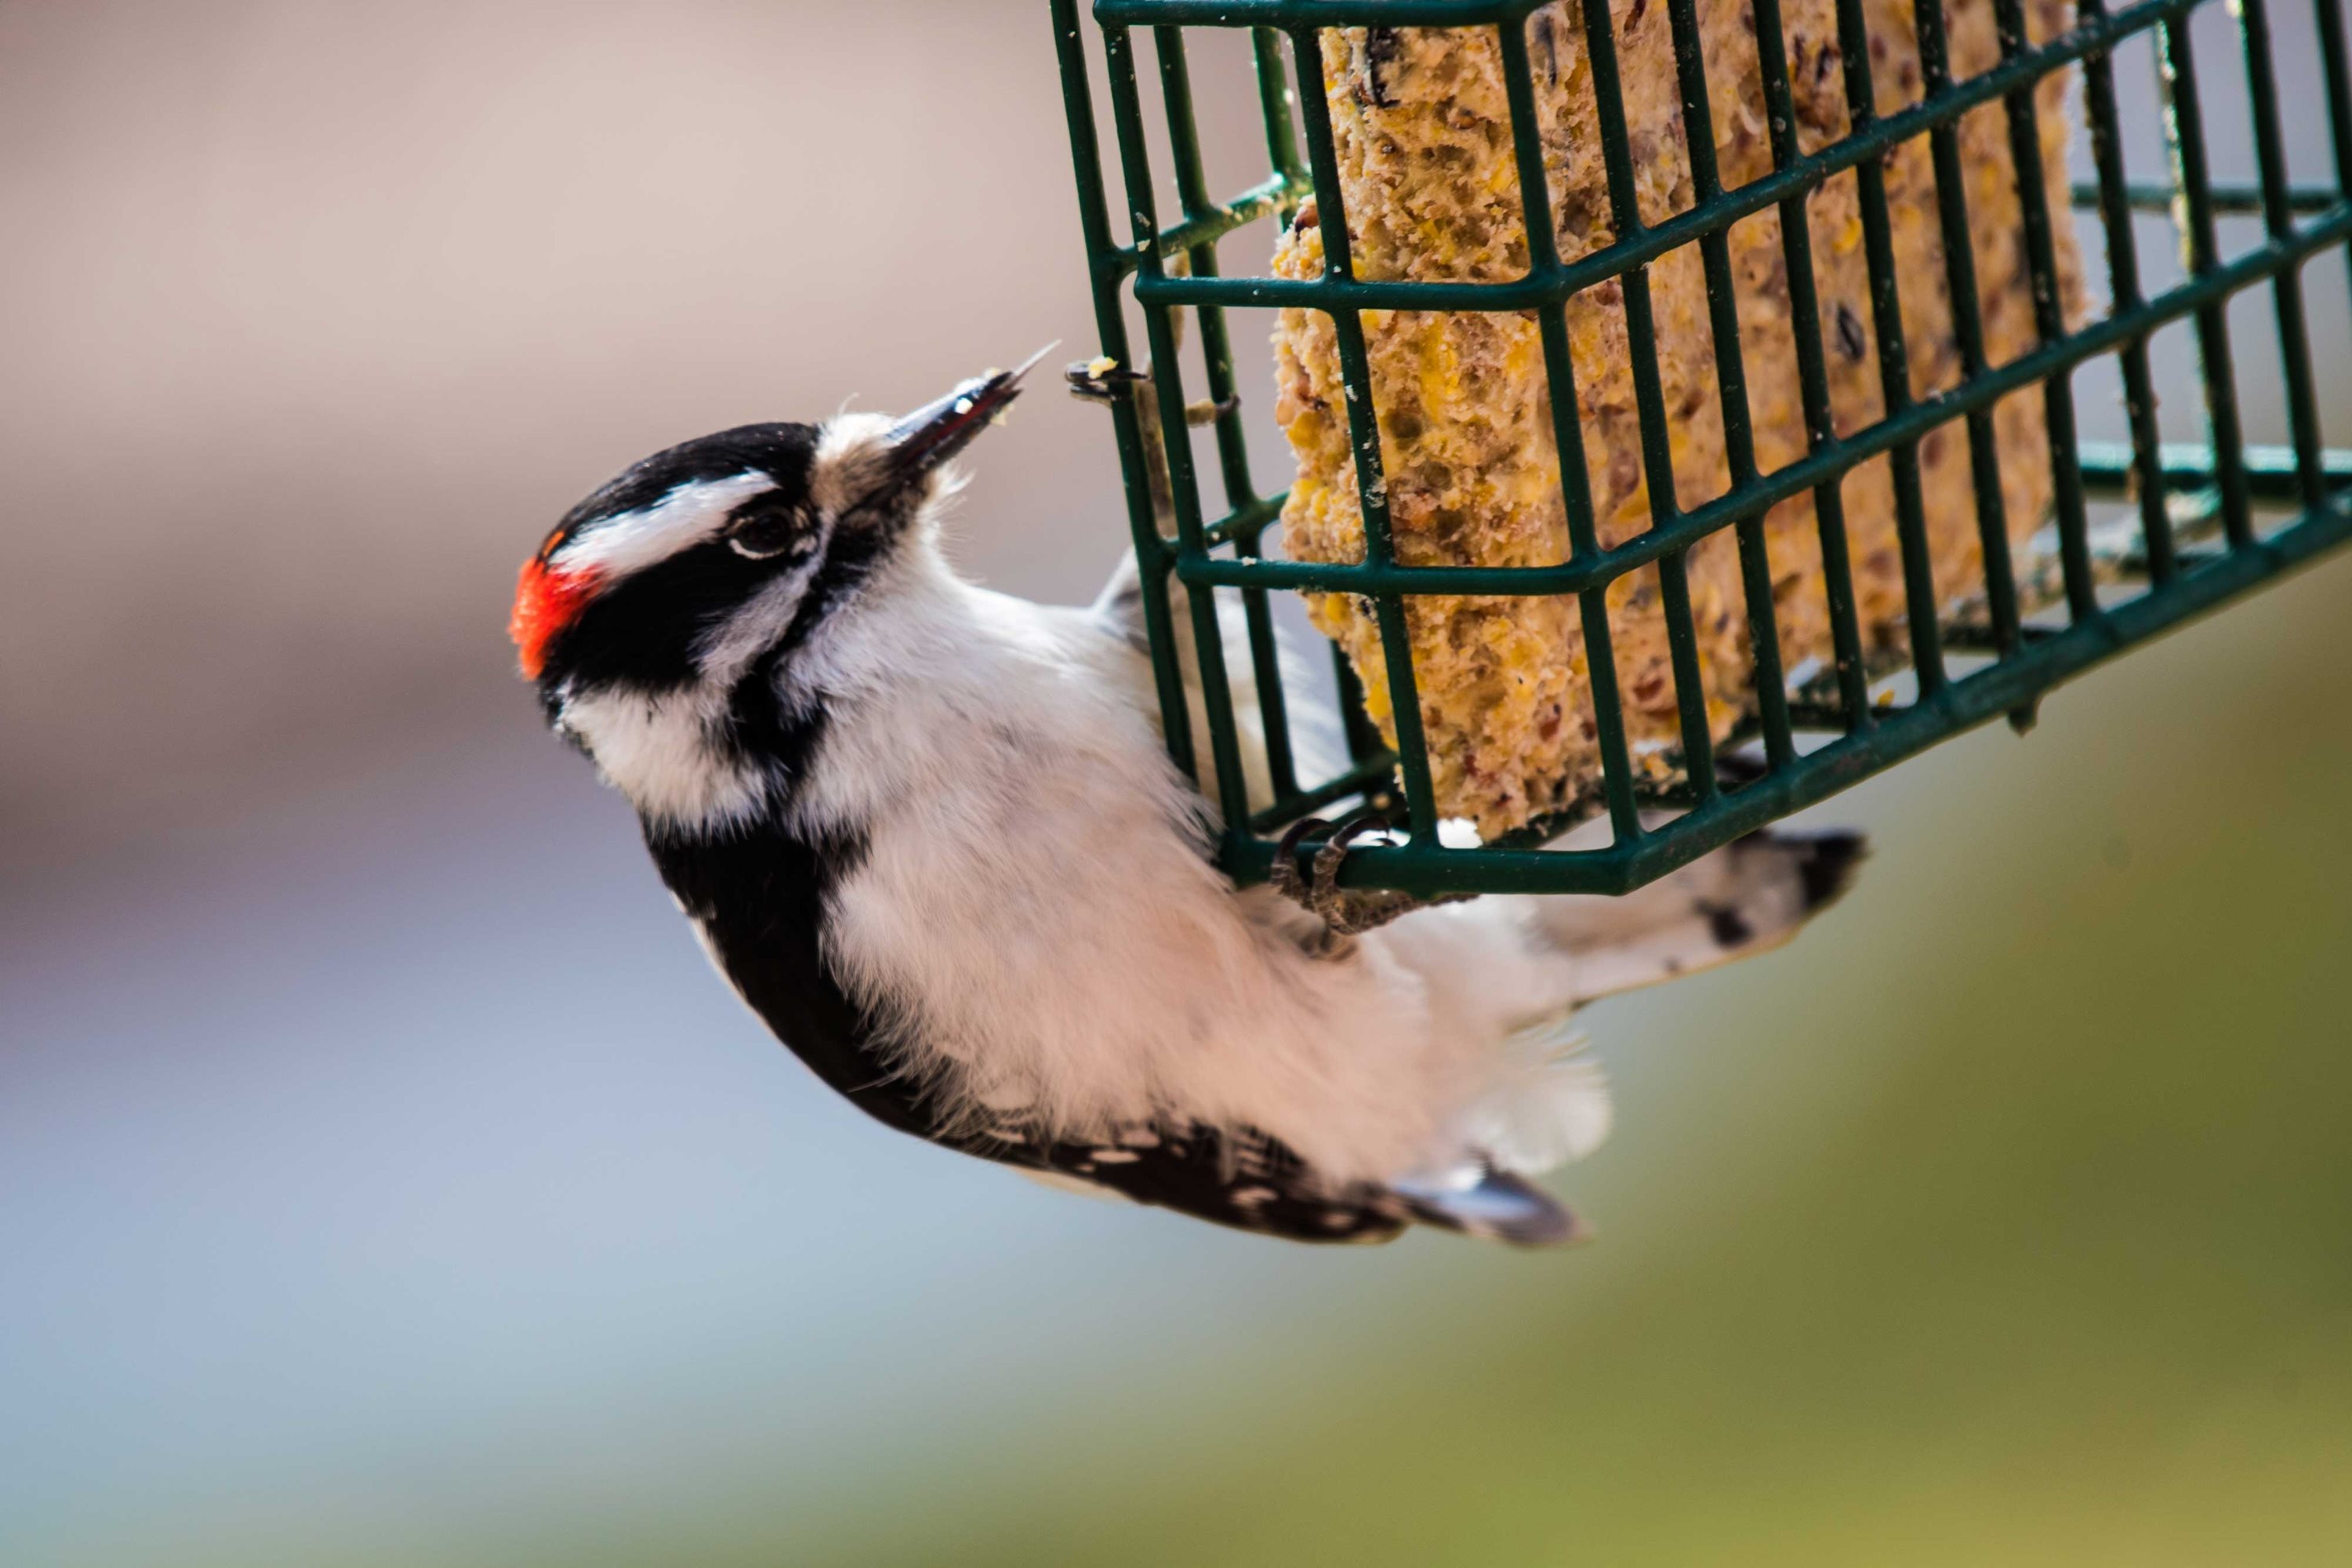 A downy woodpecker eating suet.